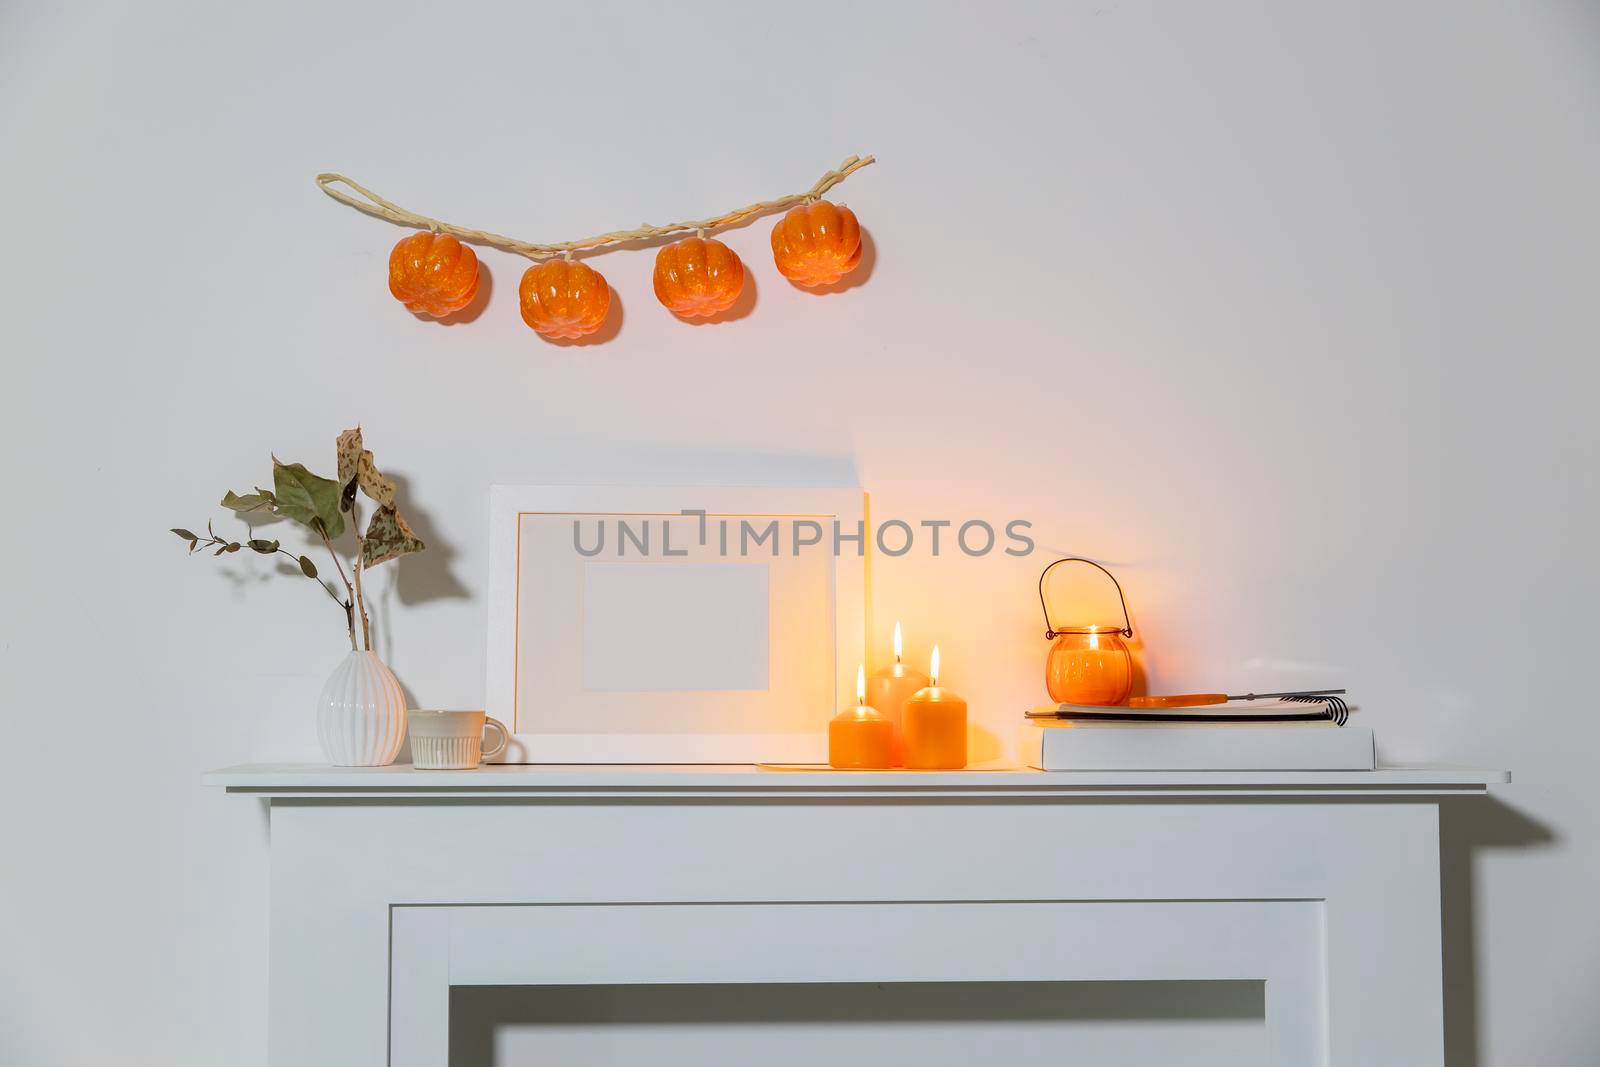 Preparing your home for Halloween. A garland of pumpkins on the wall above fake dresser panel. Frame with the inscription, orange candles and lantern. Corrugated vase with dried eucalyptus branch.